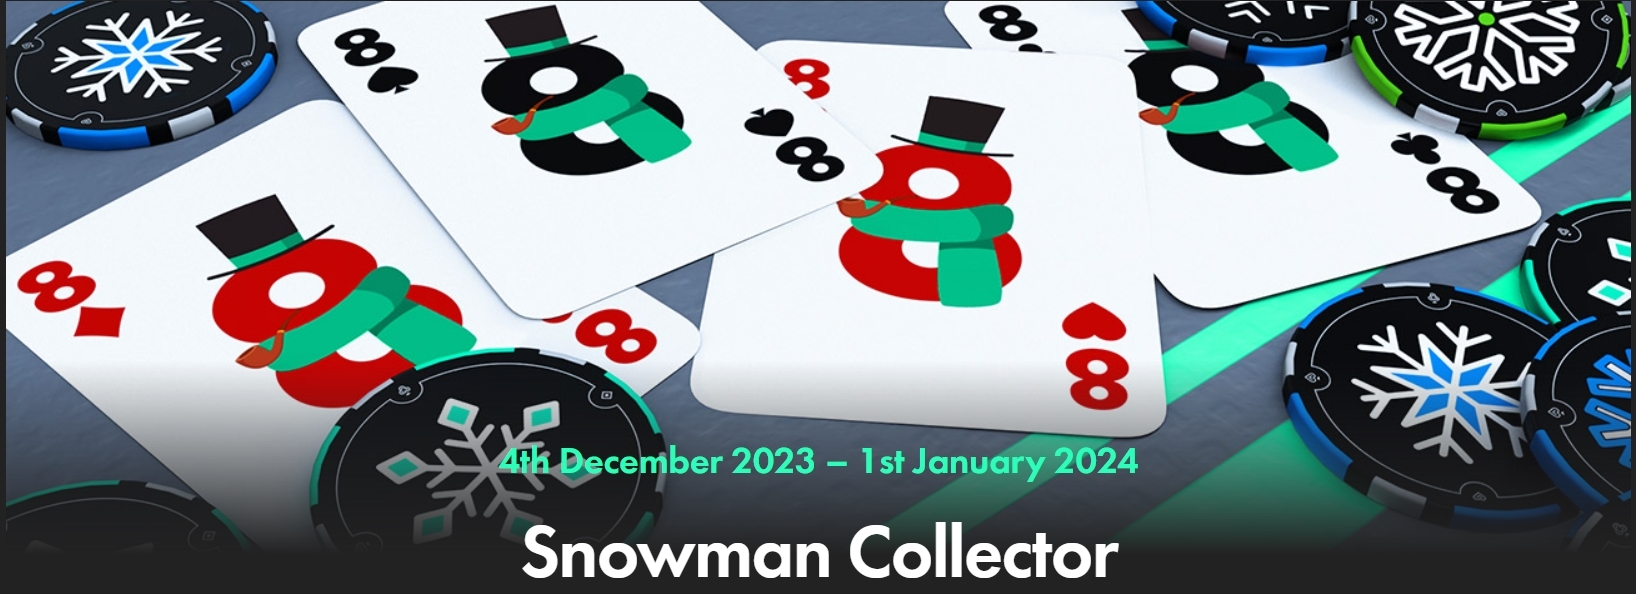 Snowman Collector Poker Leaderboards